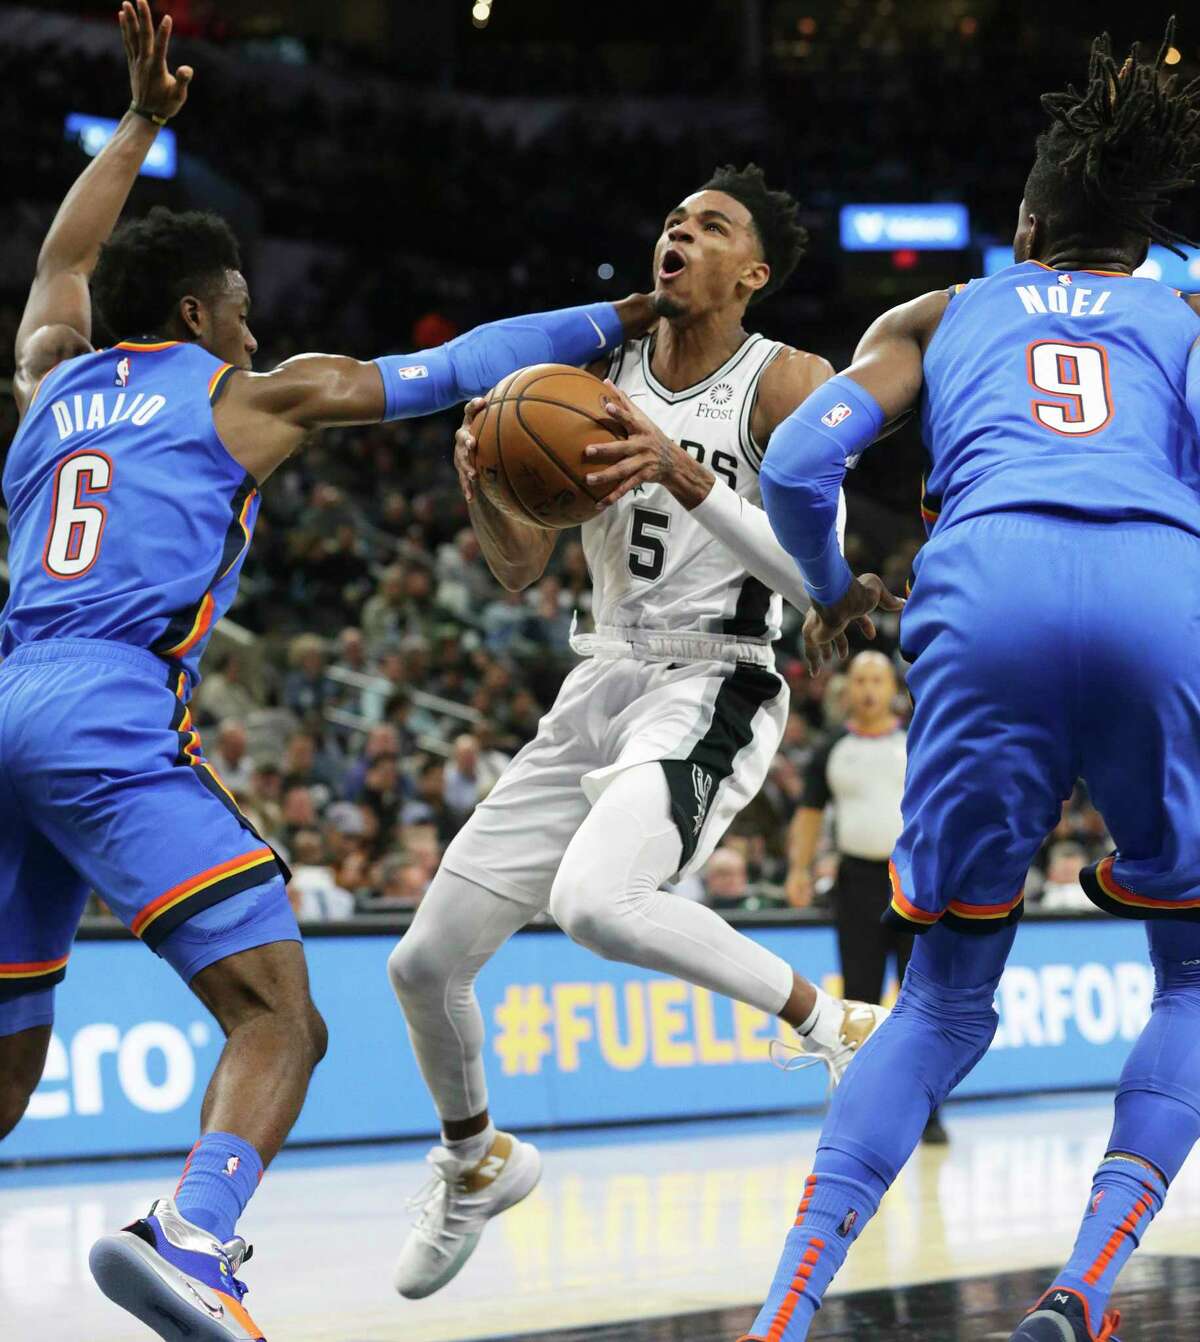 Dejounte Murray likely would have had his first career triple-double if not for a minutes restriction.